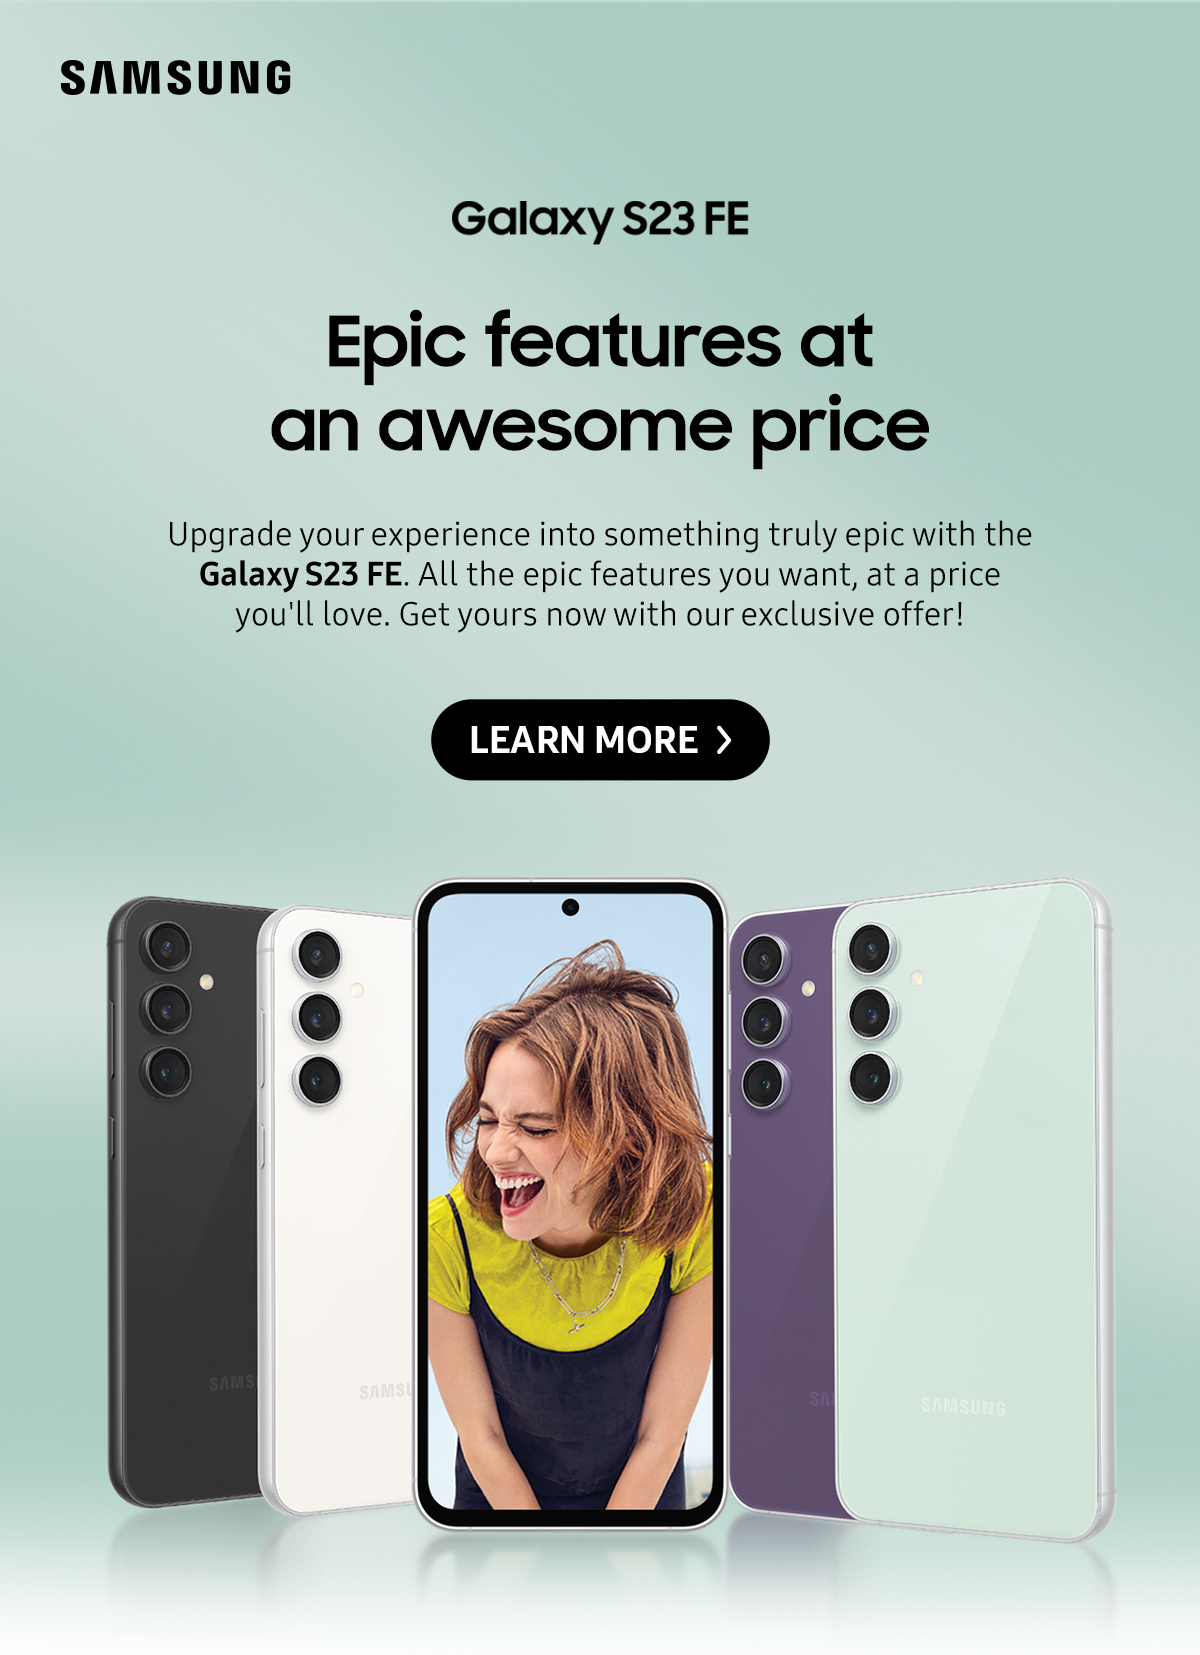 Galaxy S23 FE: Epic features at an awesome price | Upgrade your experience into something truly epic with the Galaxy S23 FE. All the epic features you want, at a price you'll love. Get yours now with our exclusive offer! Click here to learn more!